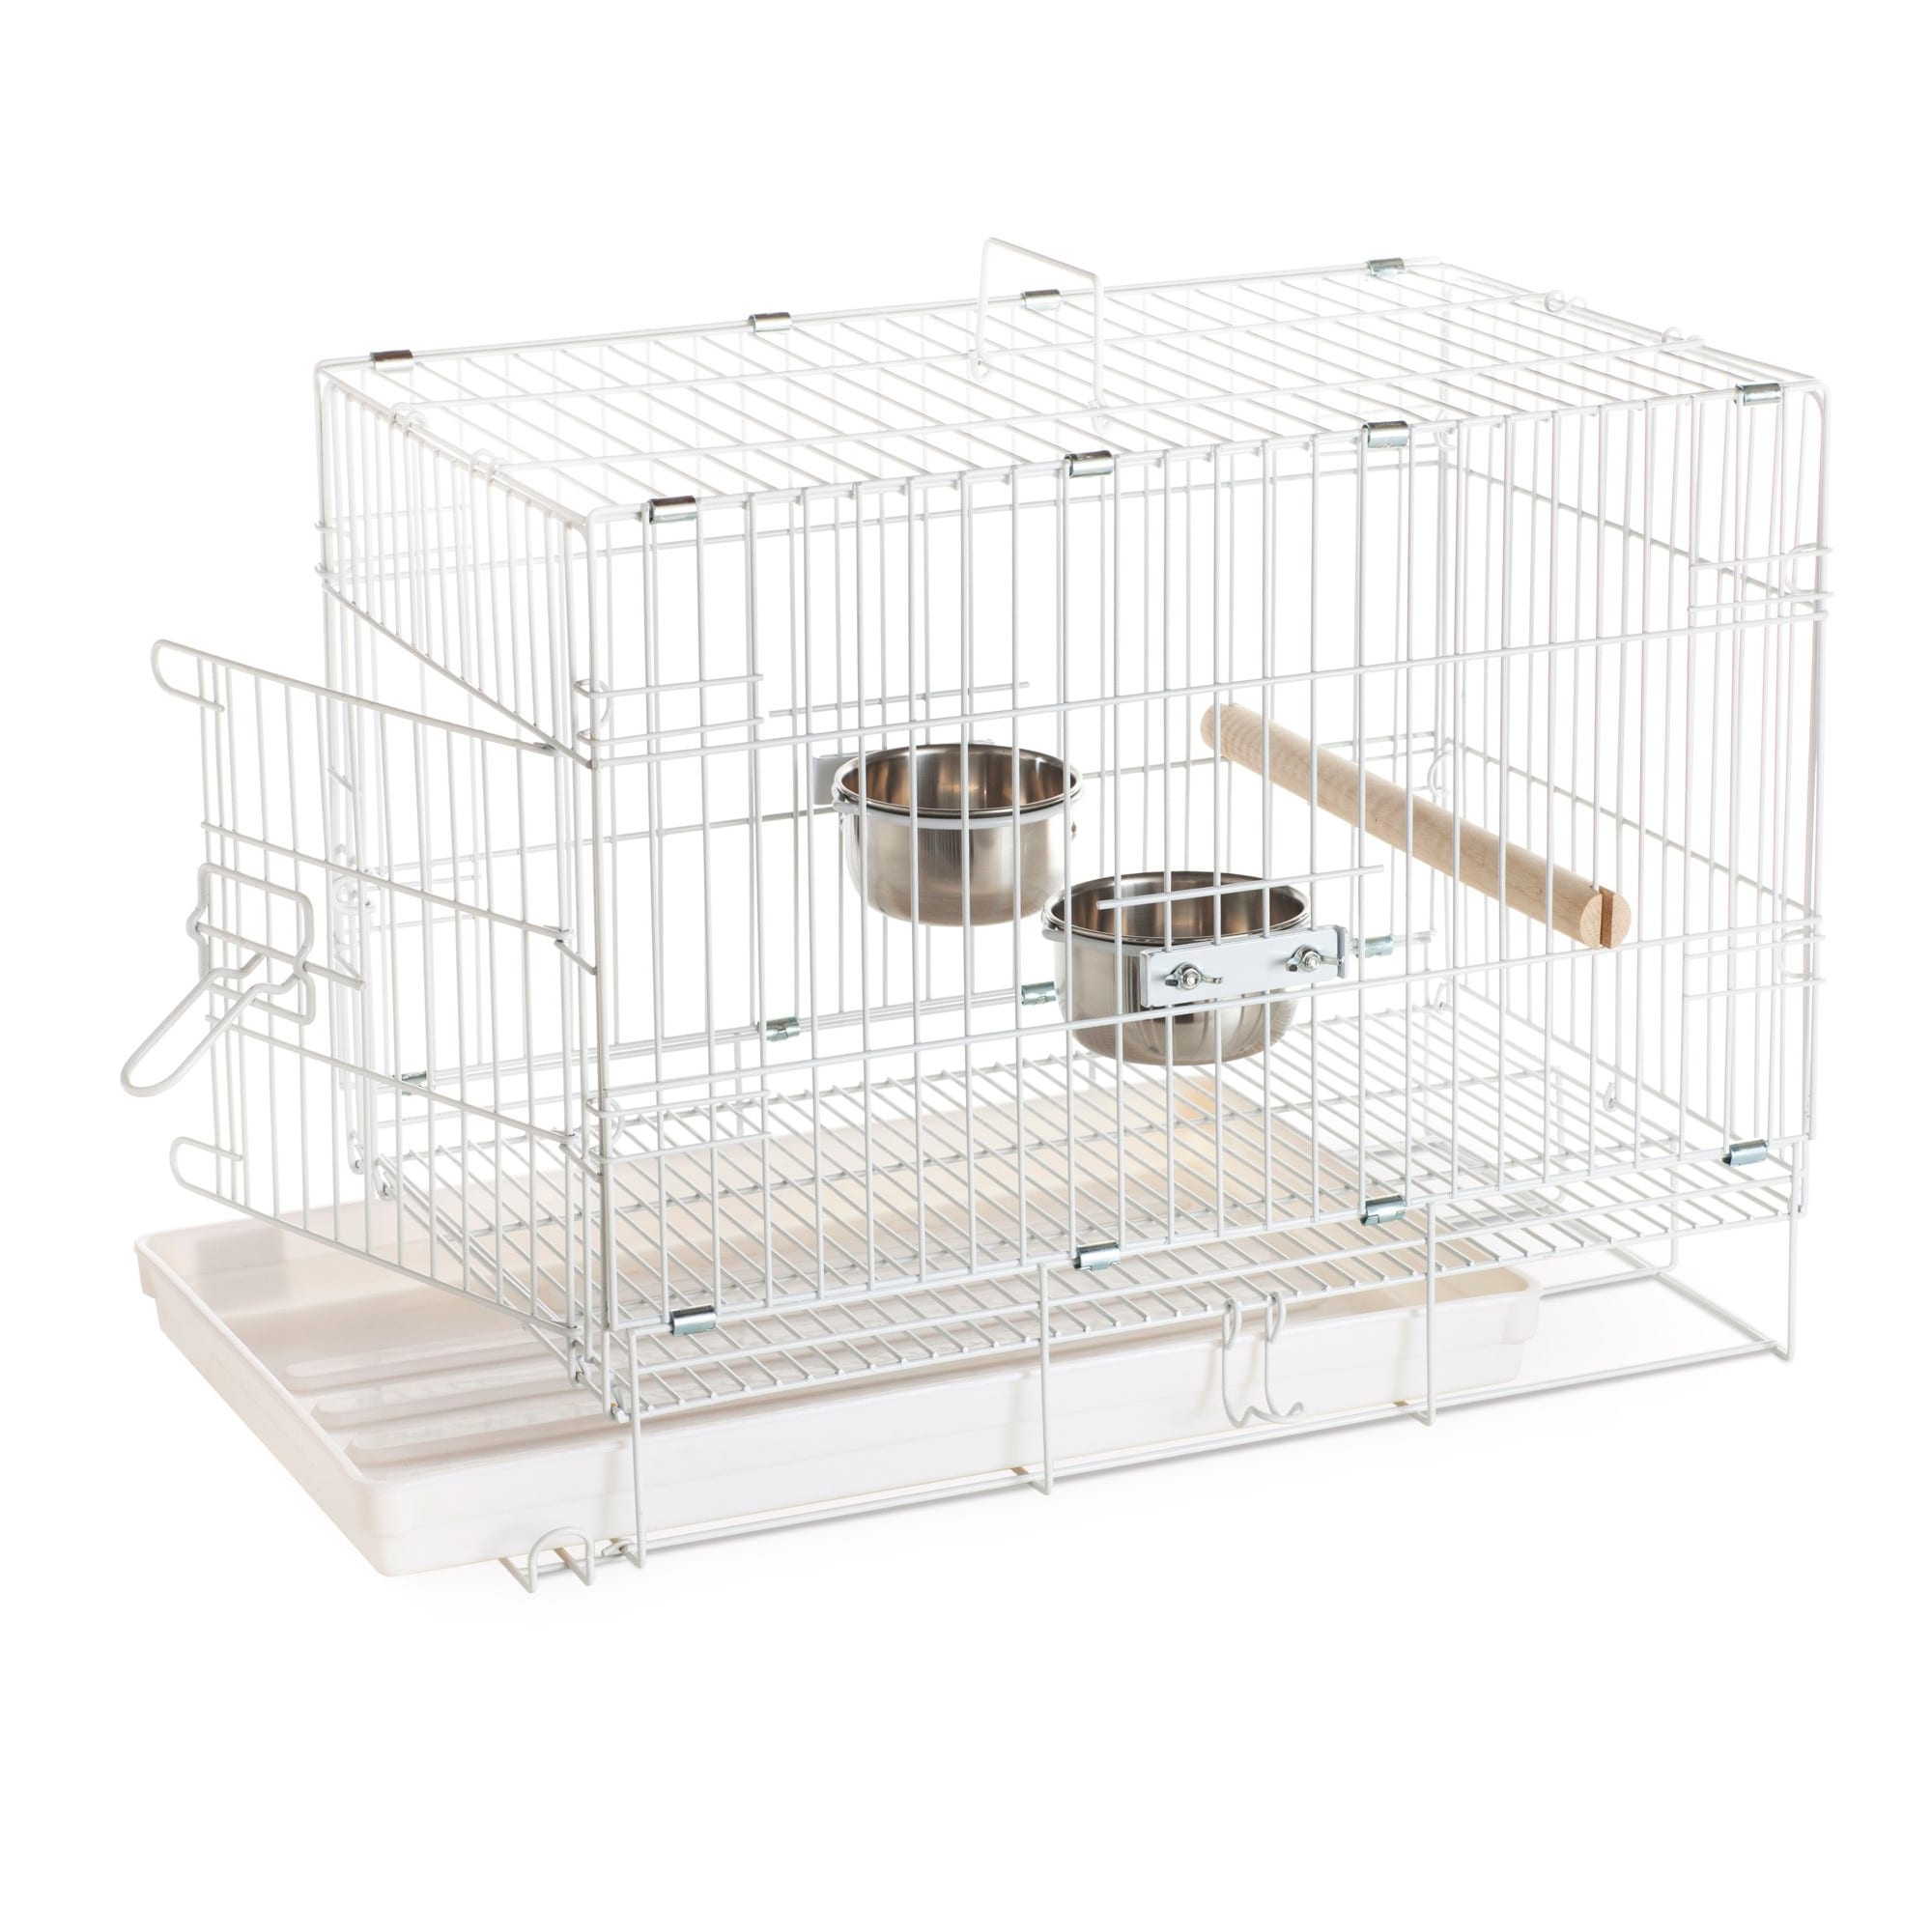 UPC 048081000205 product image for Prevue Pet Products White Travel Bird Cage, 20